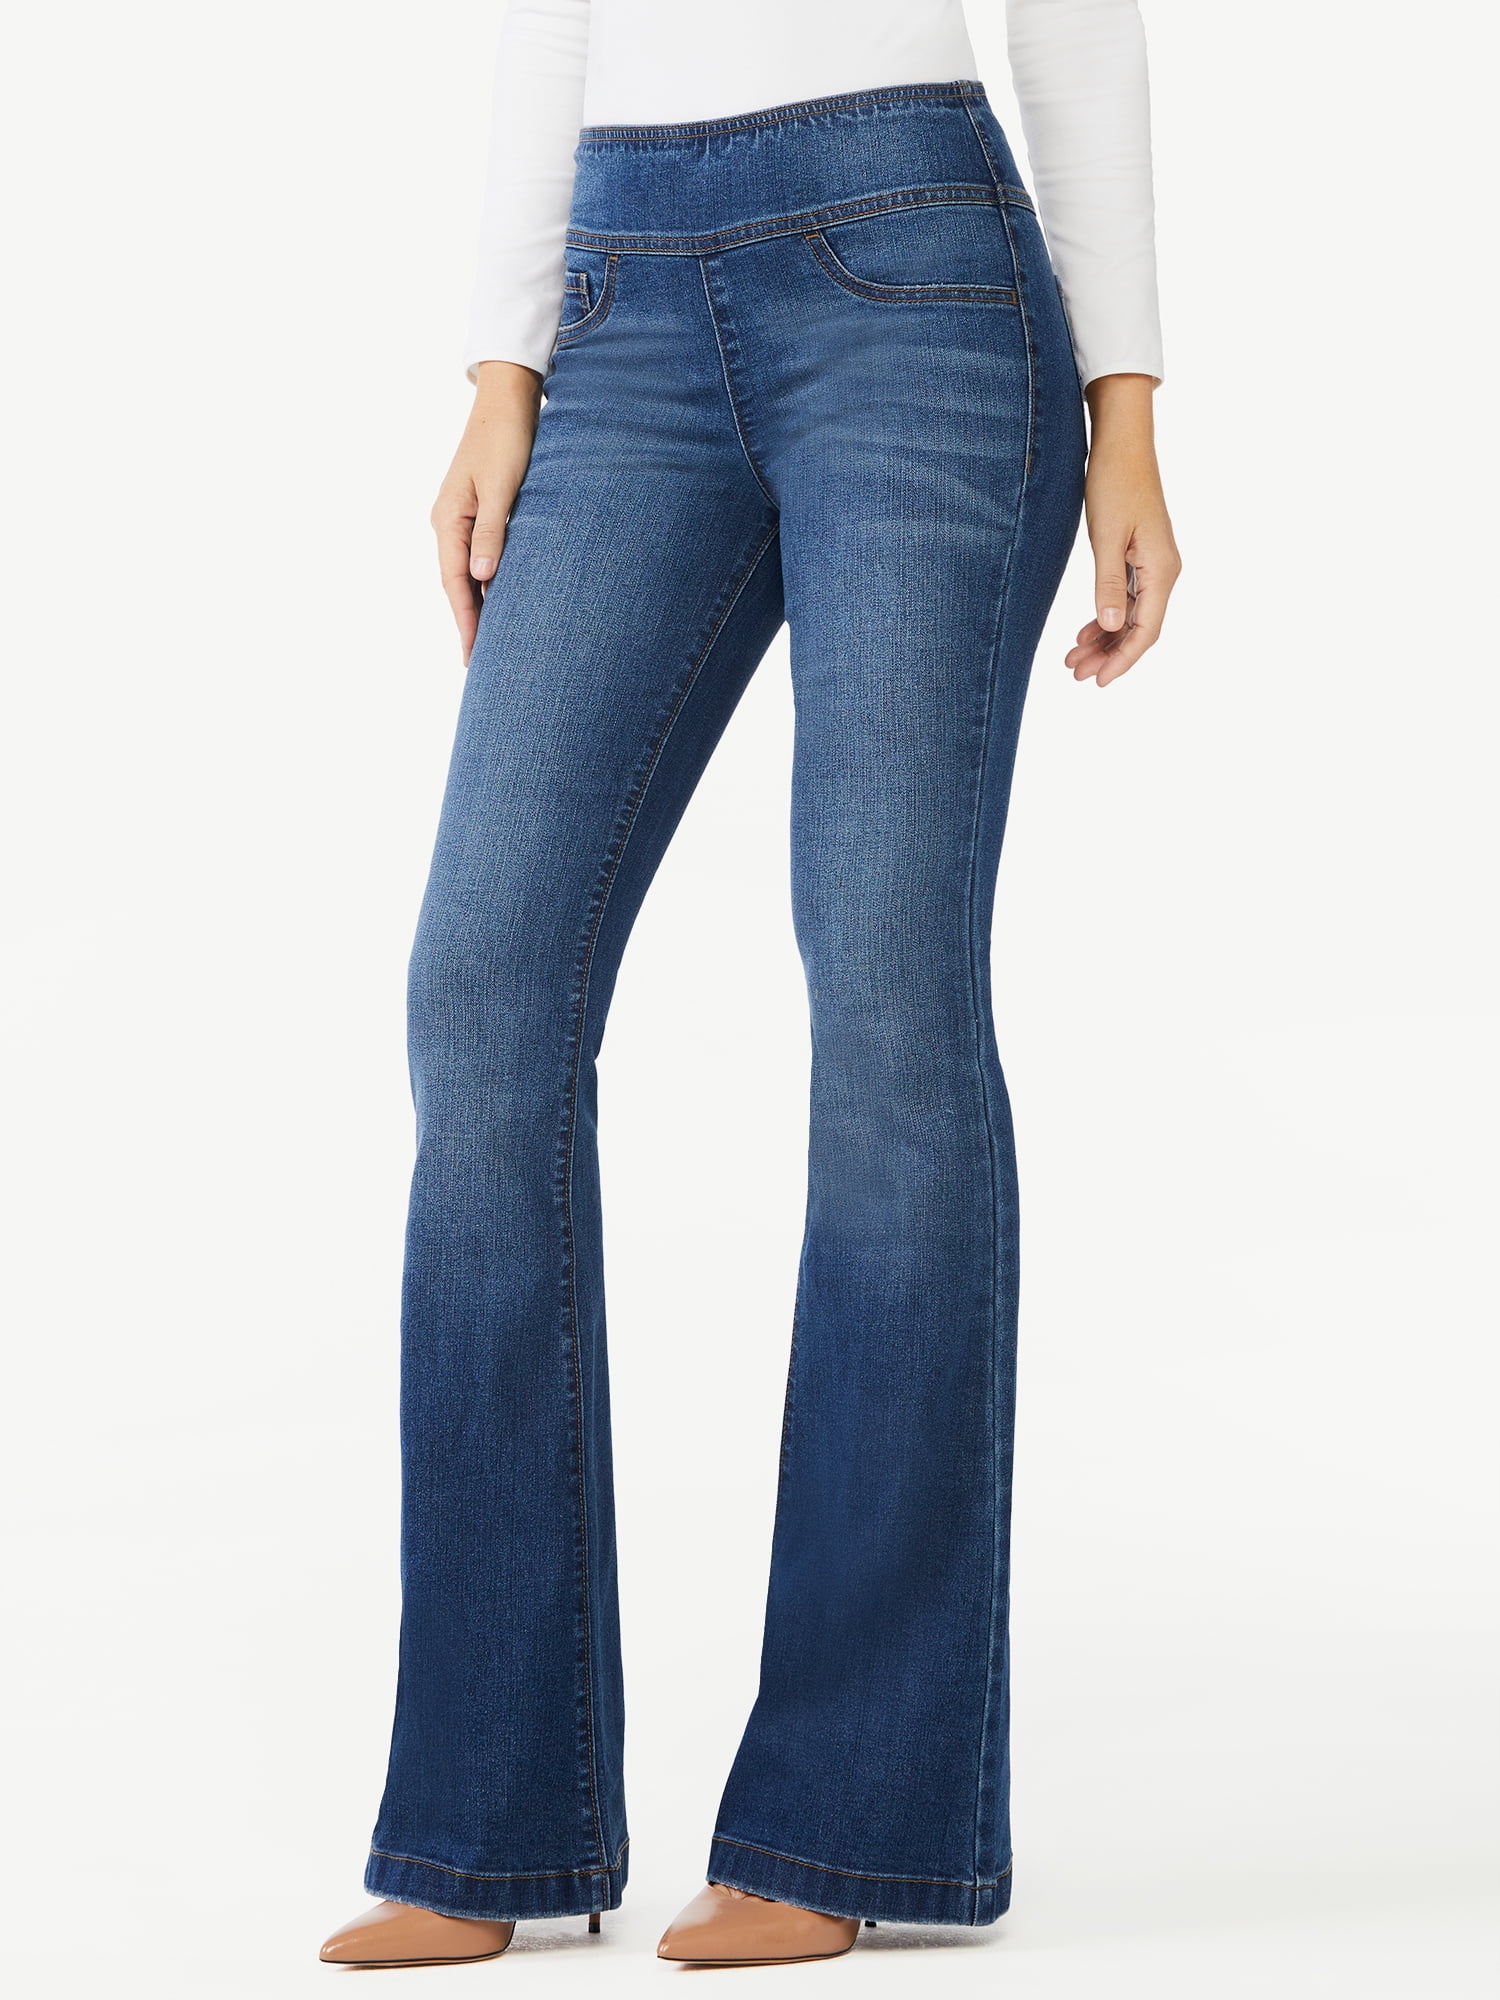 Sofia Jeans by Sofia Vergara Women's Melisa Super High Rise Flare Pull On Jeans